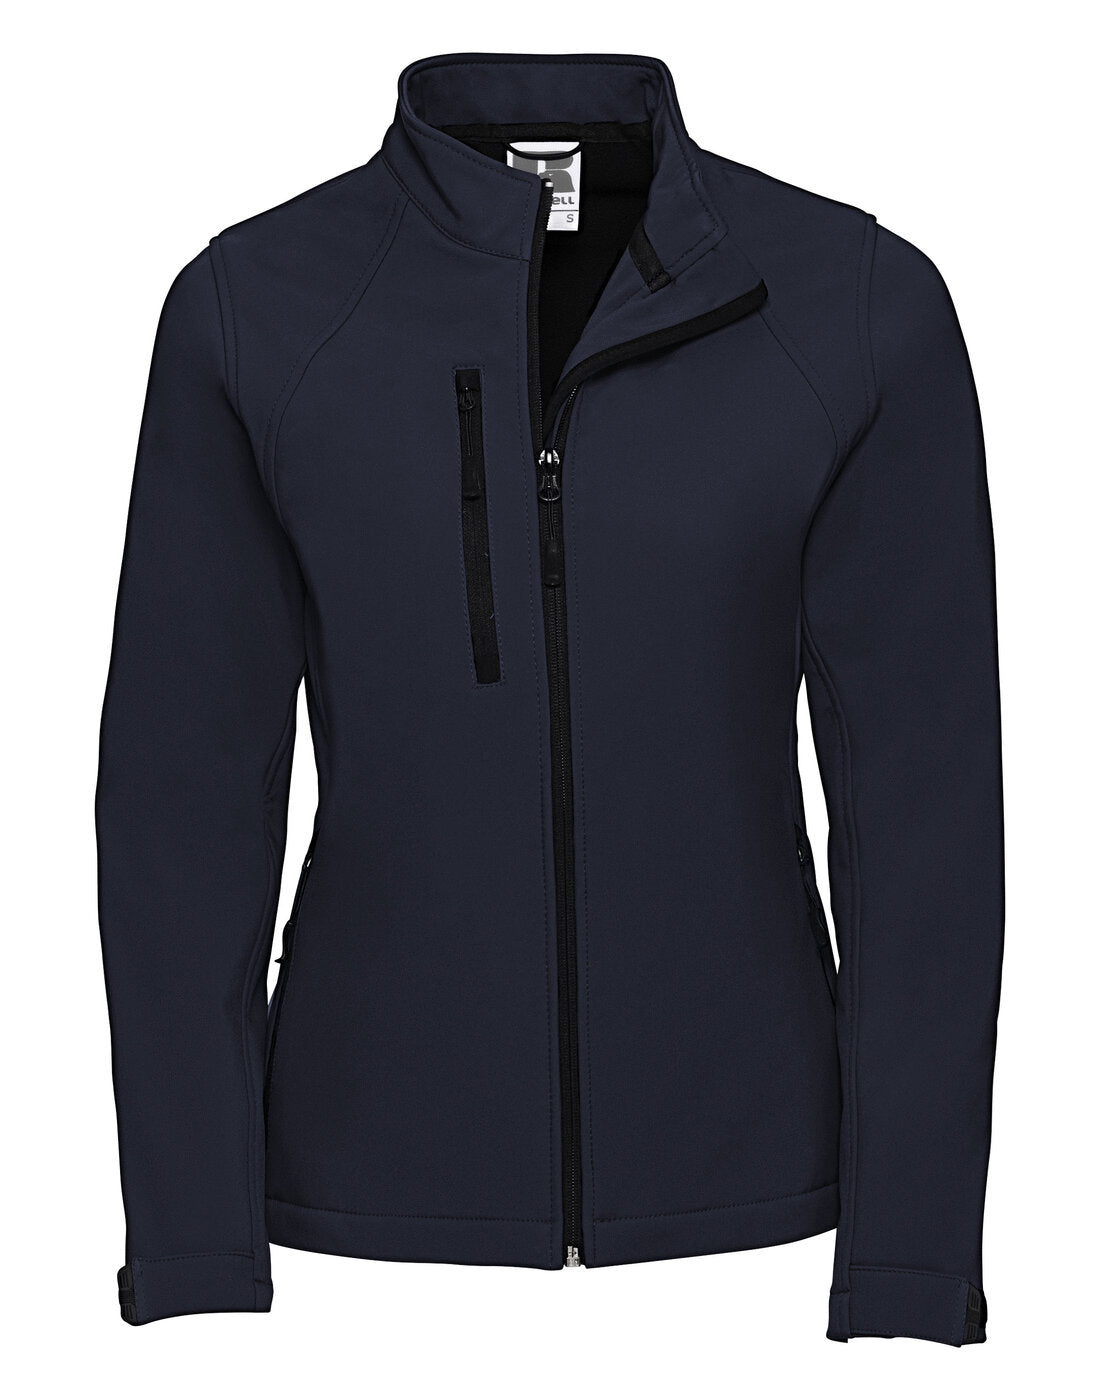 Russell Ladies Softshell Jacket - French Navy